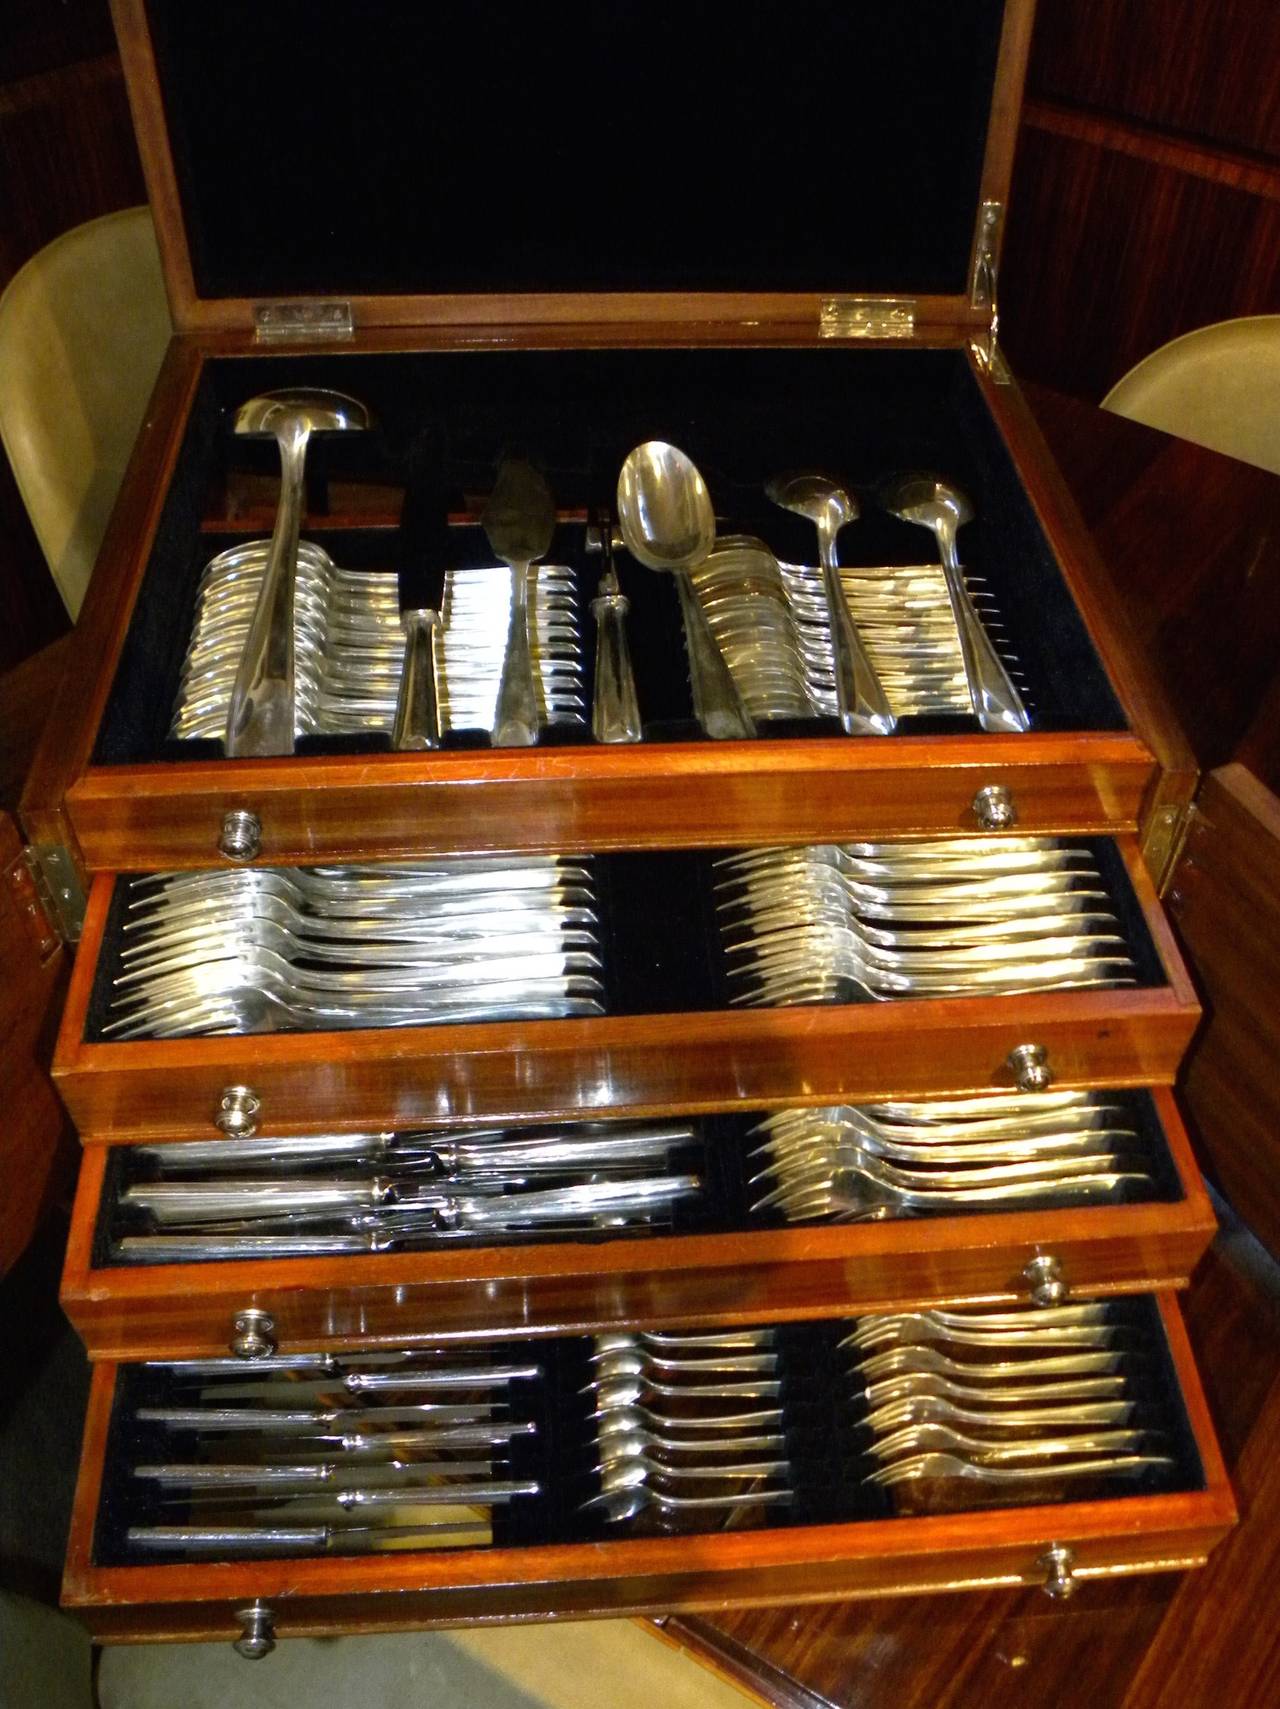 Classic Art Deco complete set of silverware, 165 pieces in total by Plata Lappas. This pattern is called “Normandie” and it includes service for 12 (with 13 pieces per place setting), plus nine serving pieces all in a fitted storage box with four